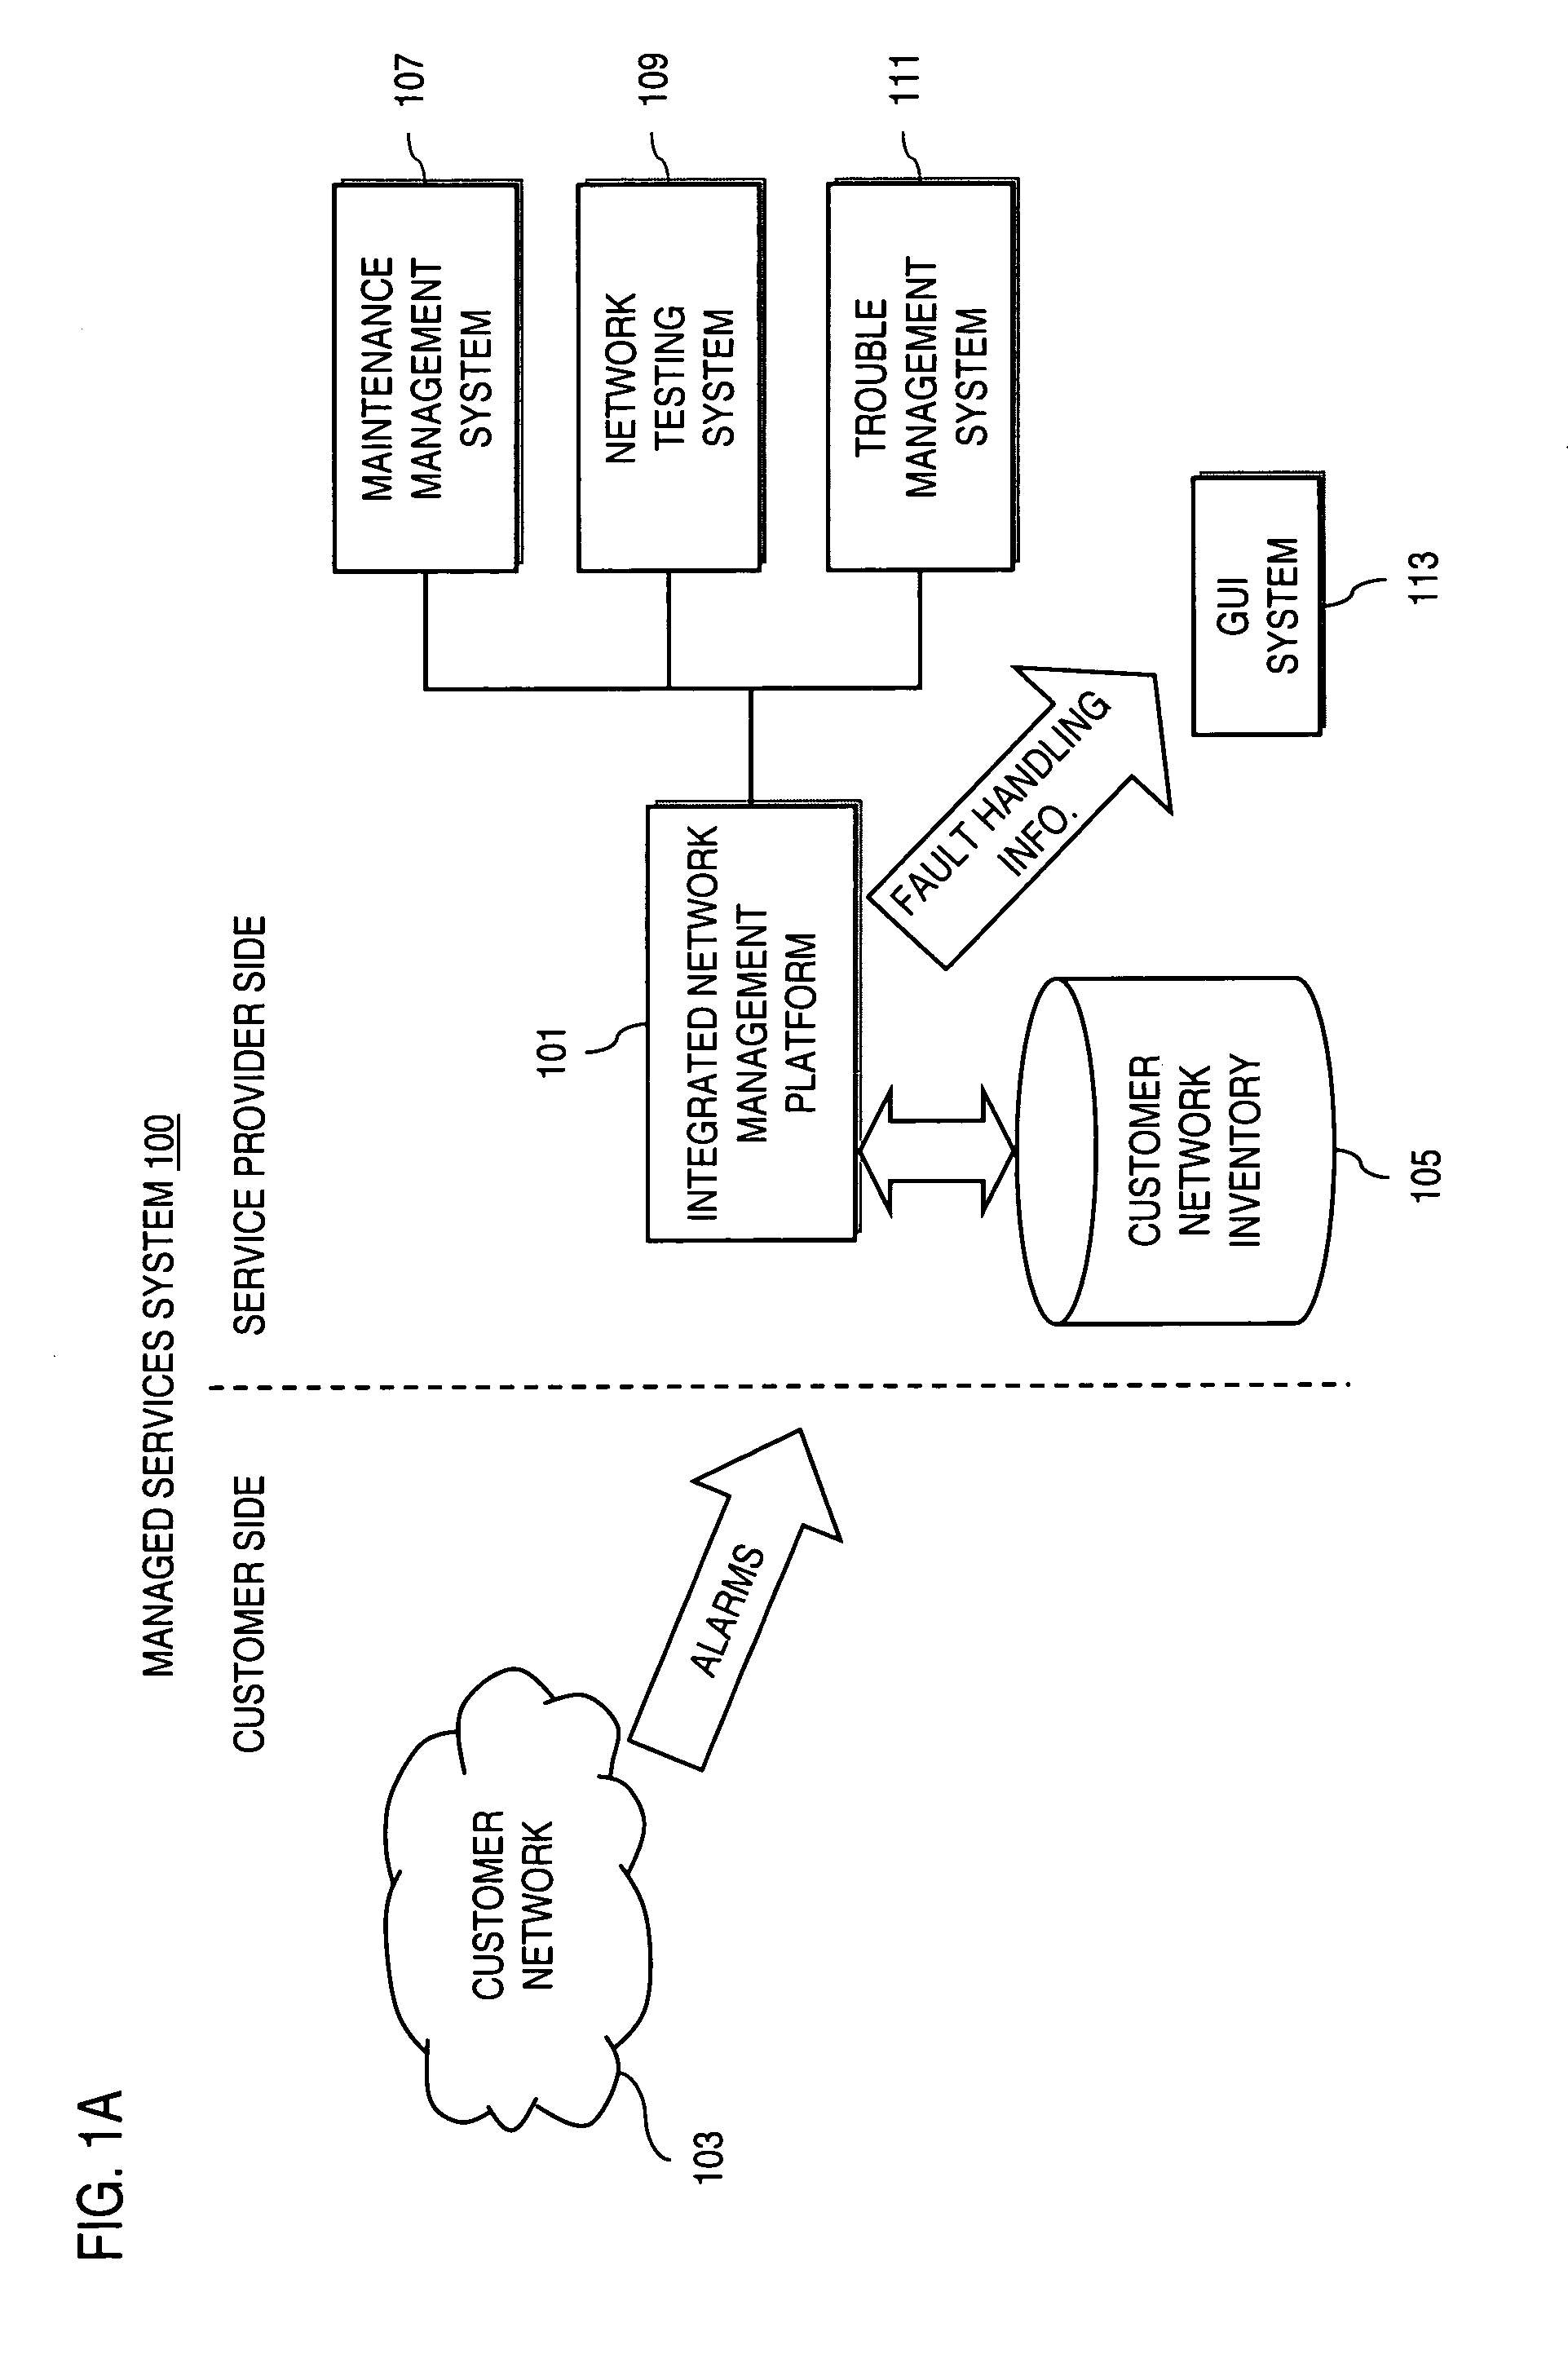 Method and system for providing alarm reporting in a managed network services environment